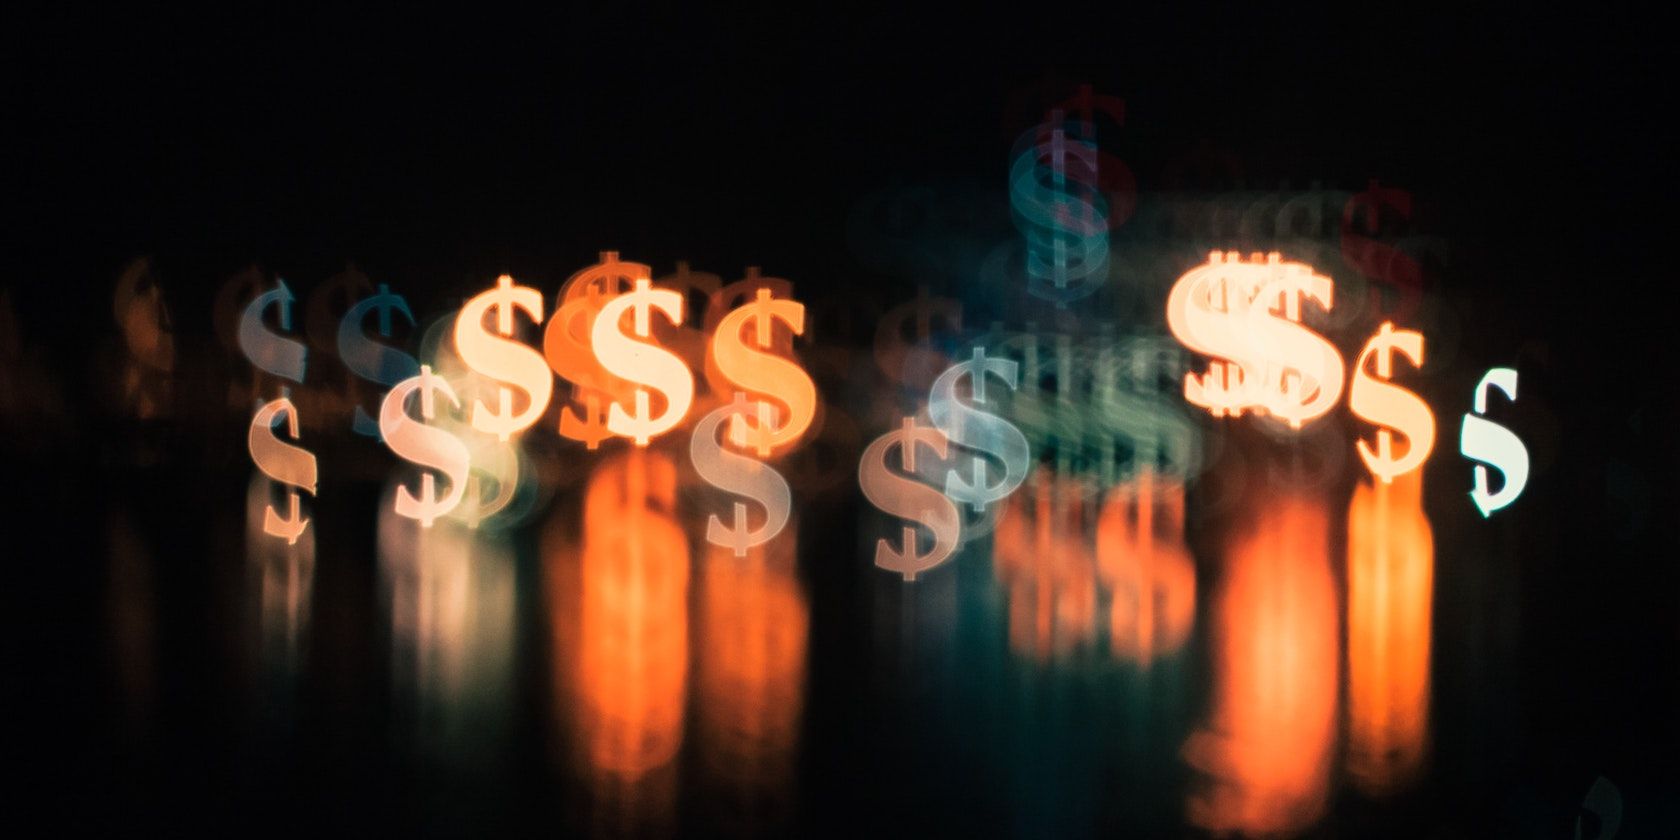 A series of blurred, glowing dollar symbols in reference to jQuery's dollar function